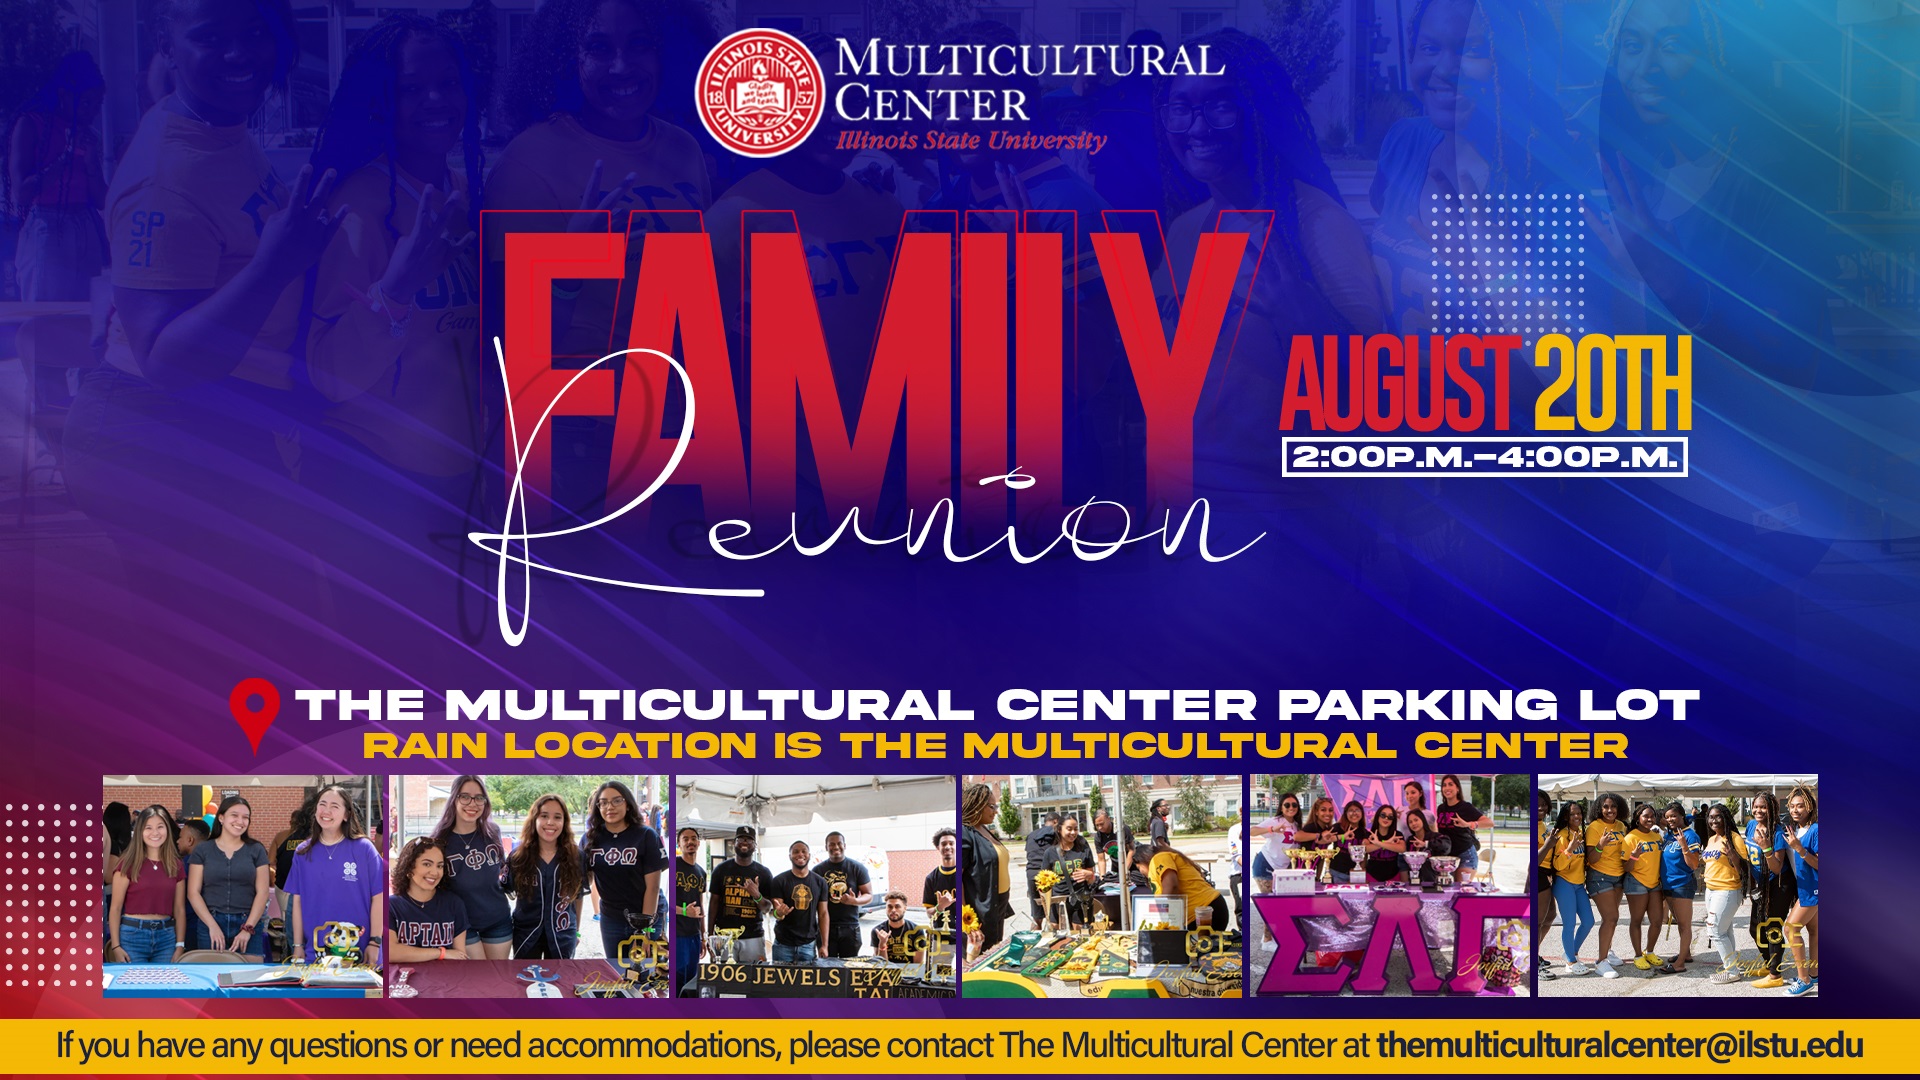 Family Reunion - Pictures of Cultural Student Organizations - Event Auguest 20 2-4pm at Multicultural Center